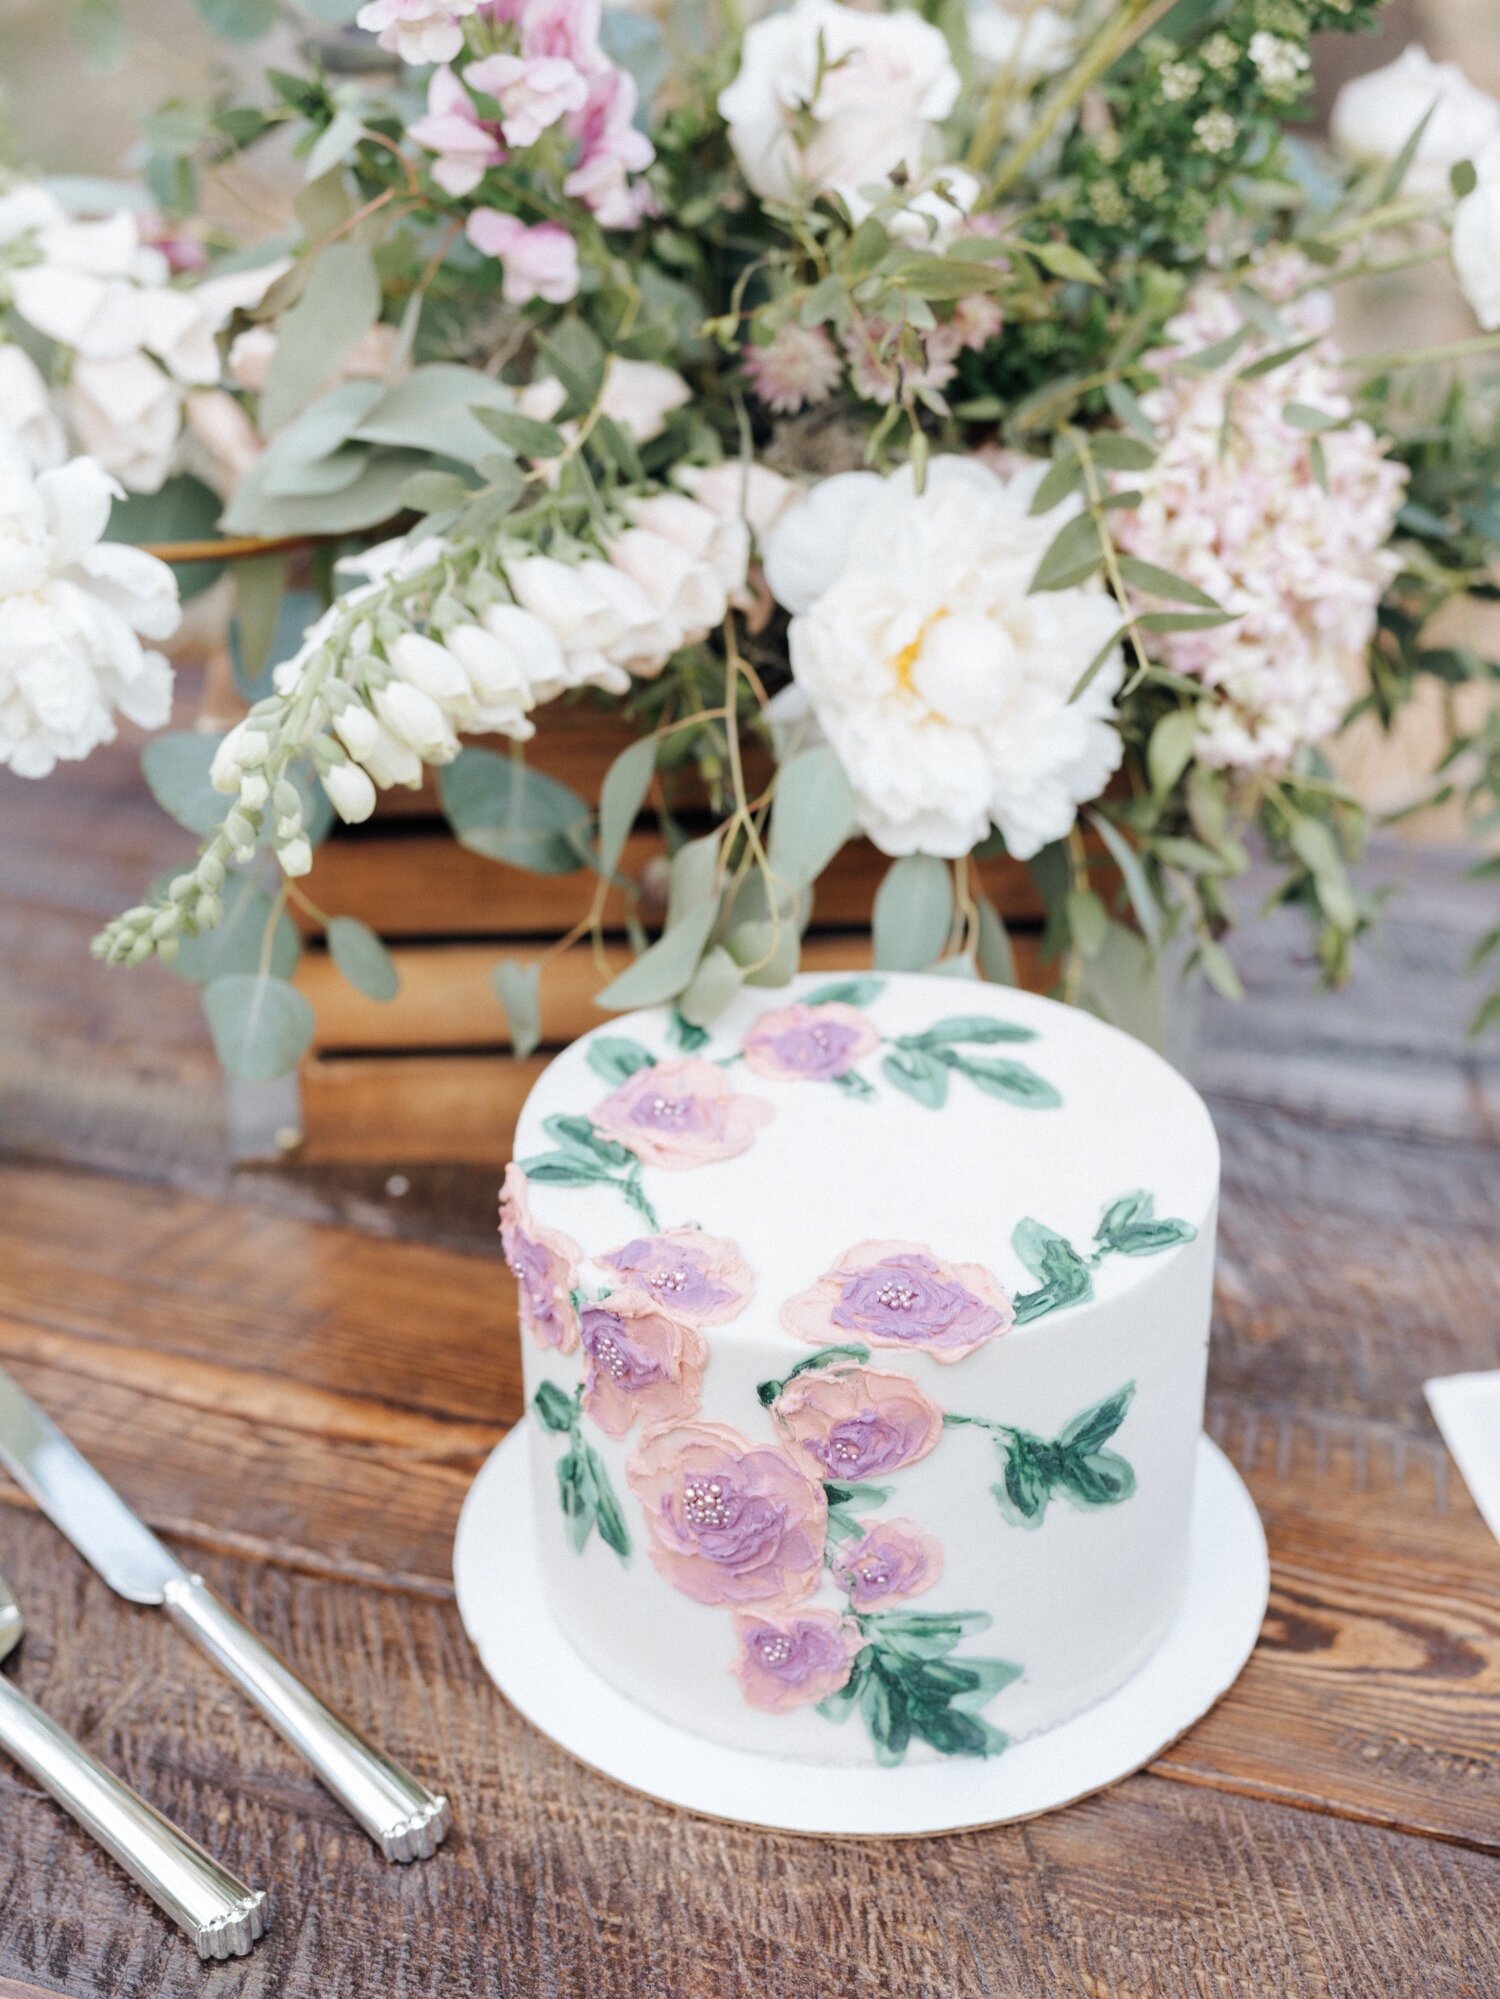  Simple Wedding Cake, Watercolor cake,   Family style wedding tables, Wedding Reception, Rustic Wedding, Boho Wedding, Colorado Wedding, Colorado Elopement, Colorado Wedding Planner, Colorado Elopement Planner, Estes Park Wedding Planner, Estes Park 